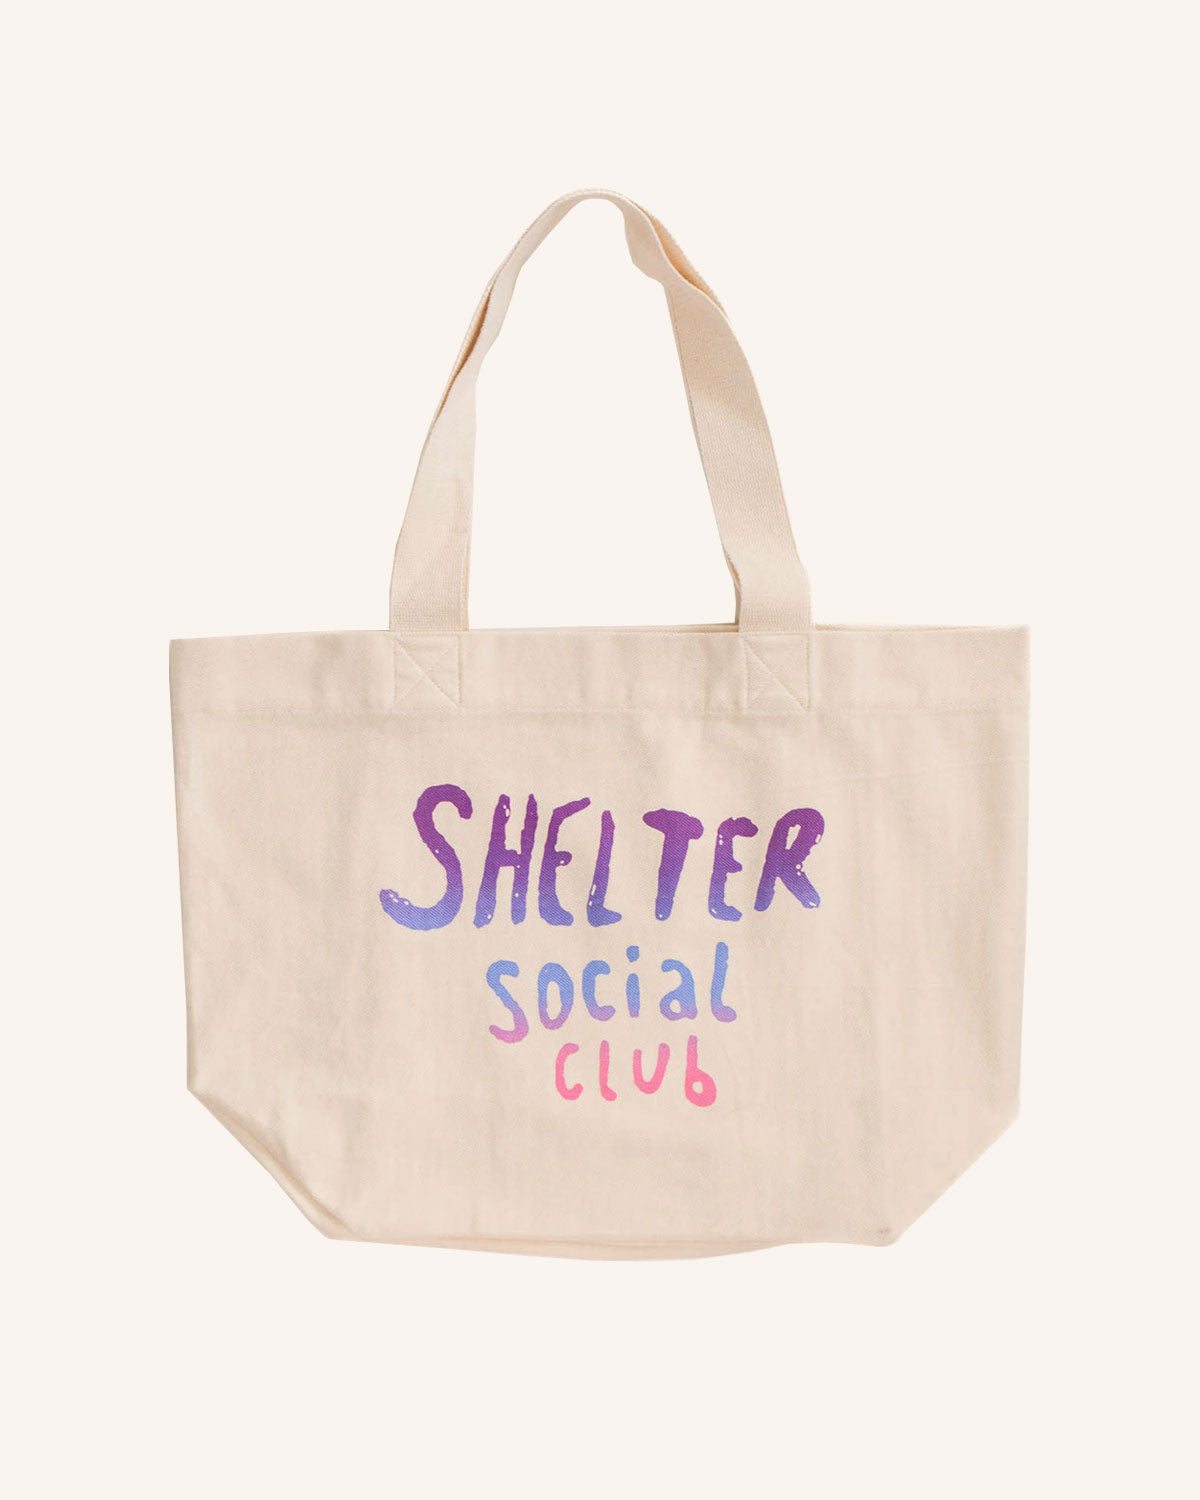 SSC GRADIENT TOTE - Shelter Social Club